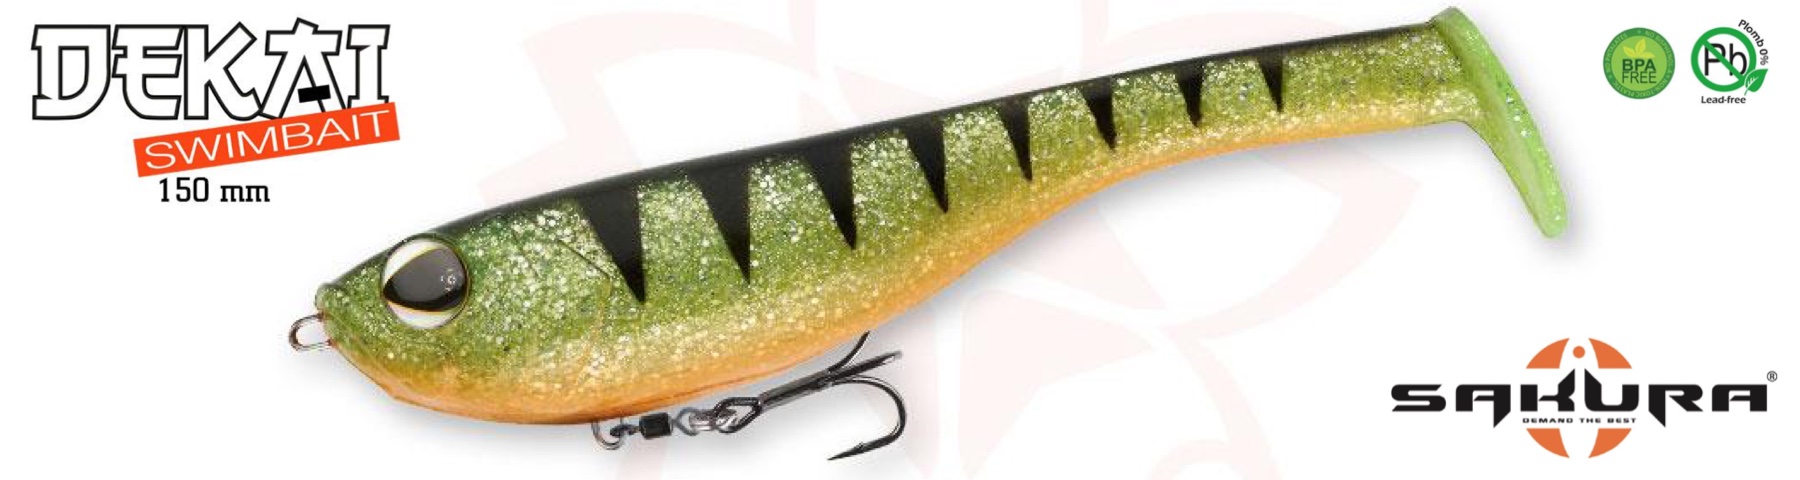 Fishing-Lure-Evolution, your web store that specializes in baits